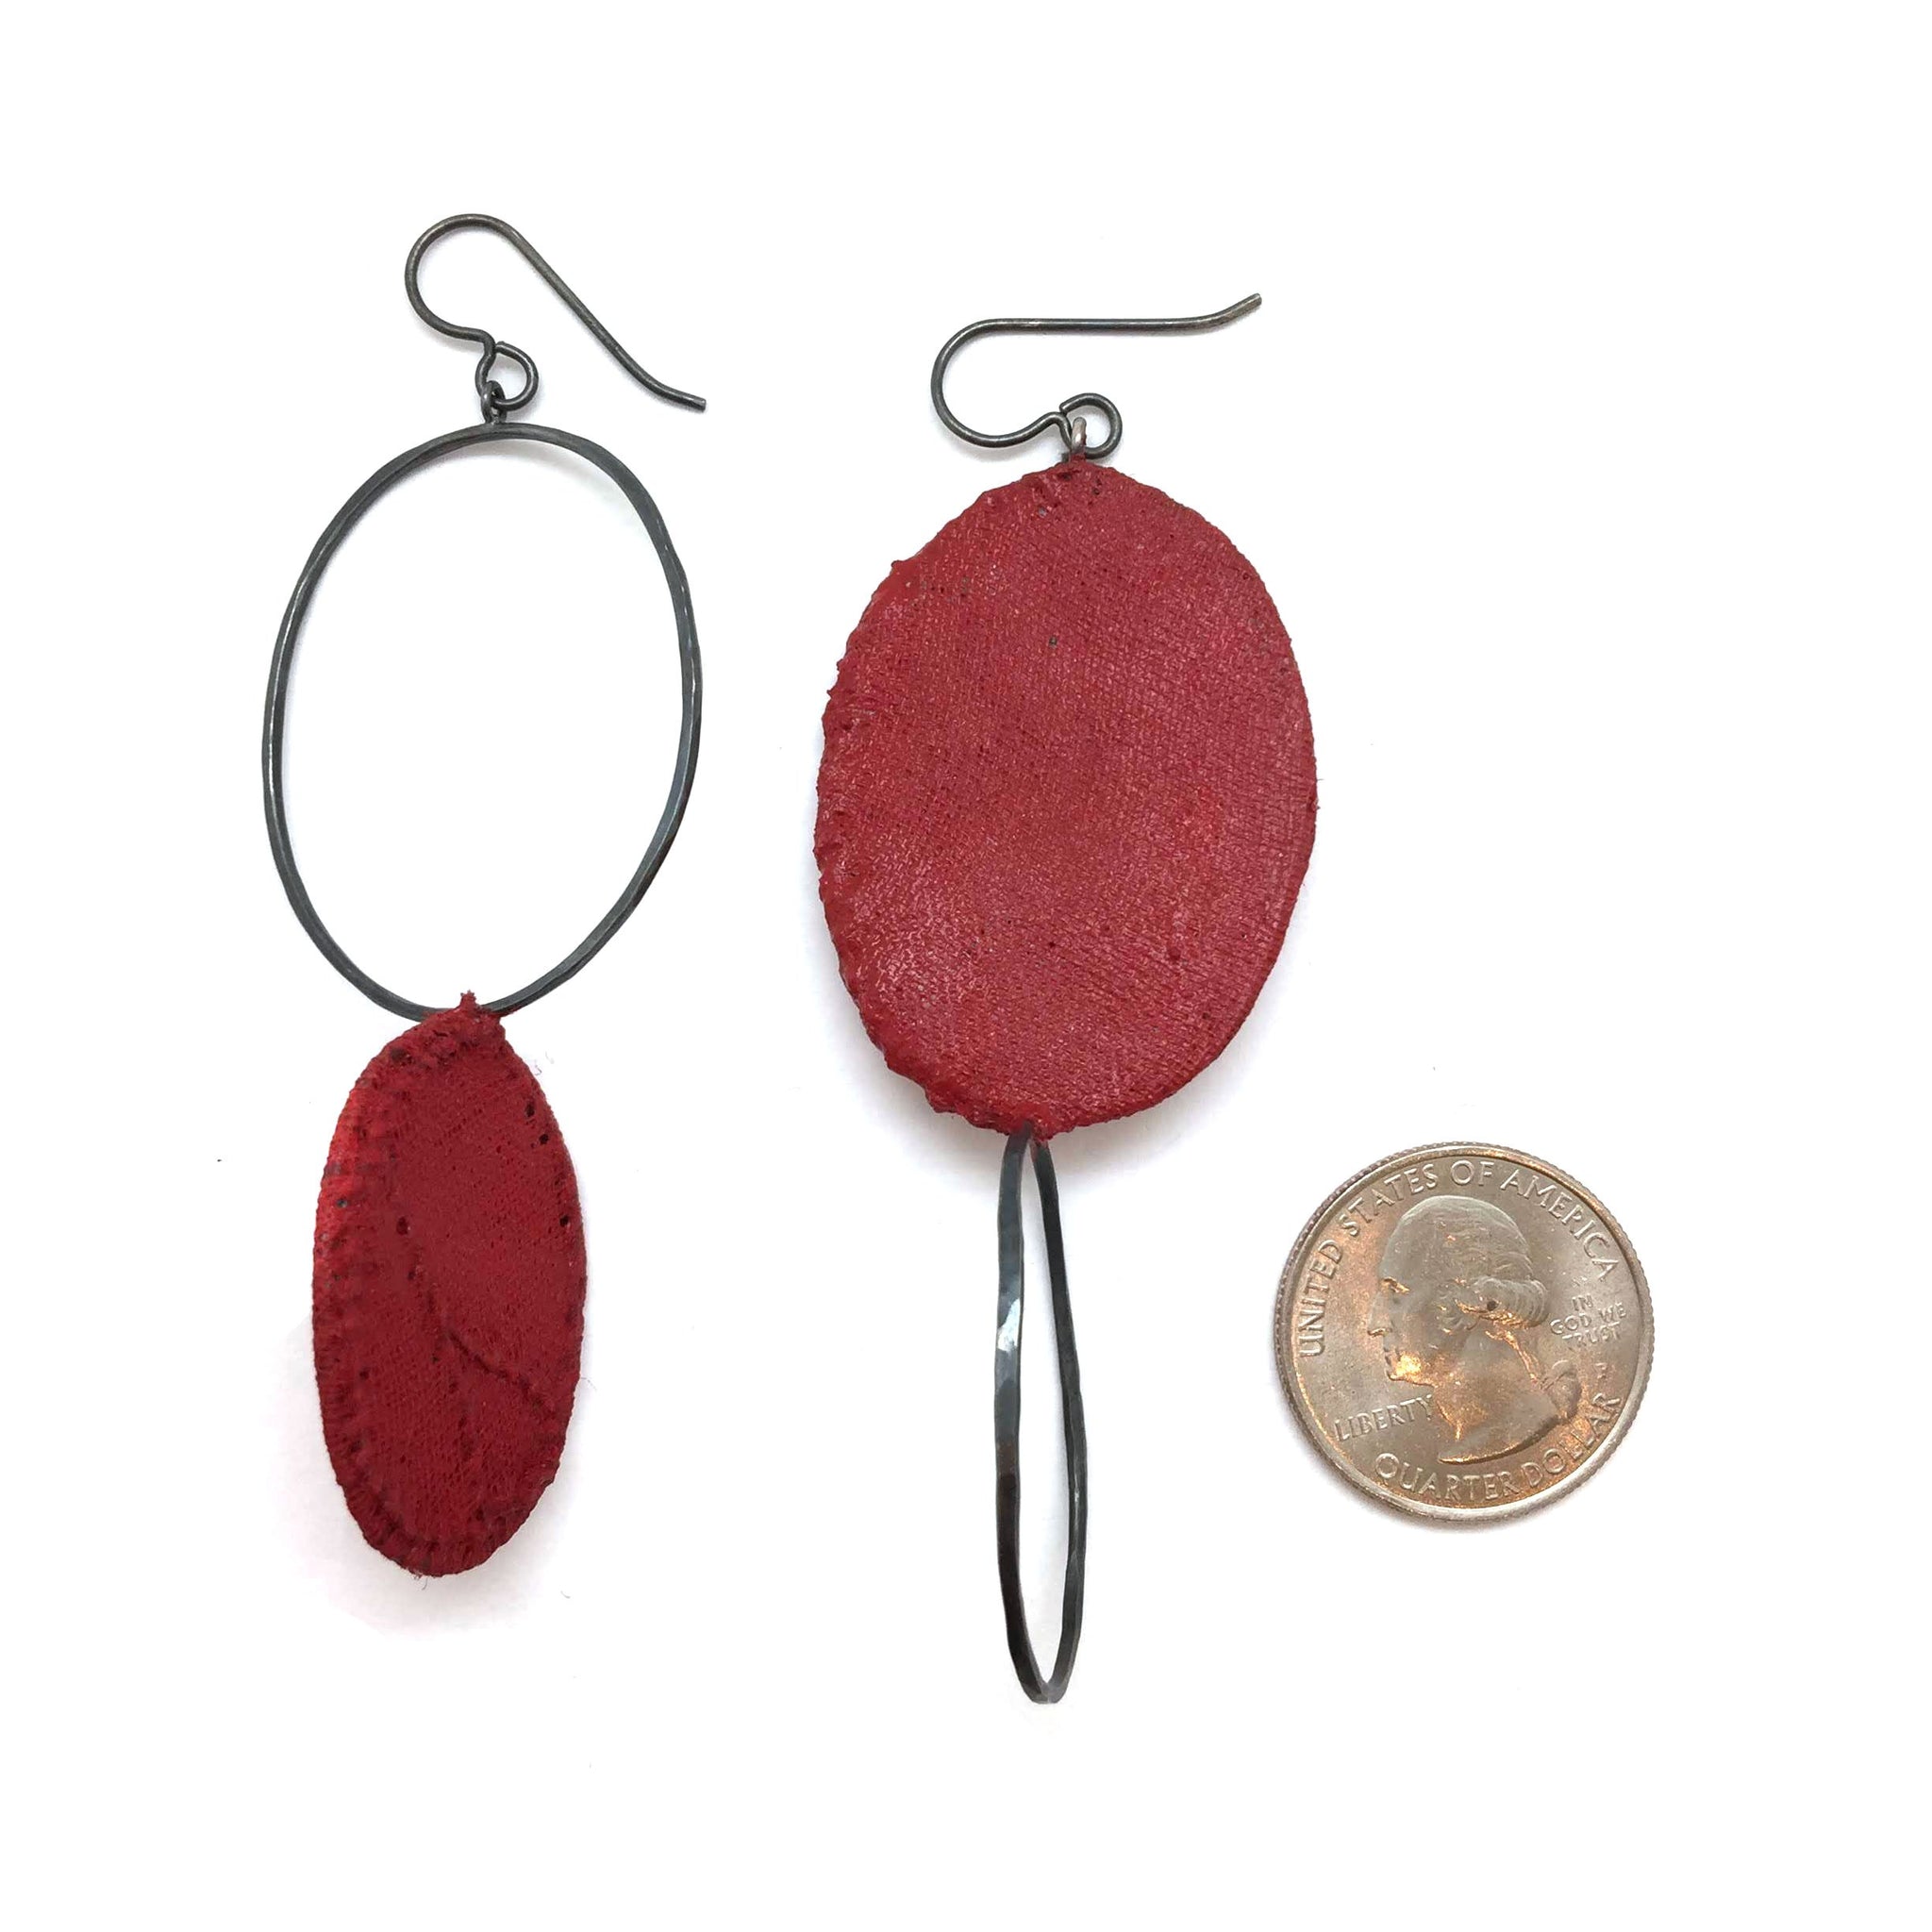 Double Oval Hoops- Red Earrings Myung Urso Pistachios